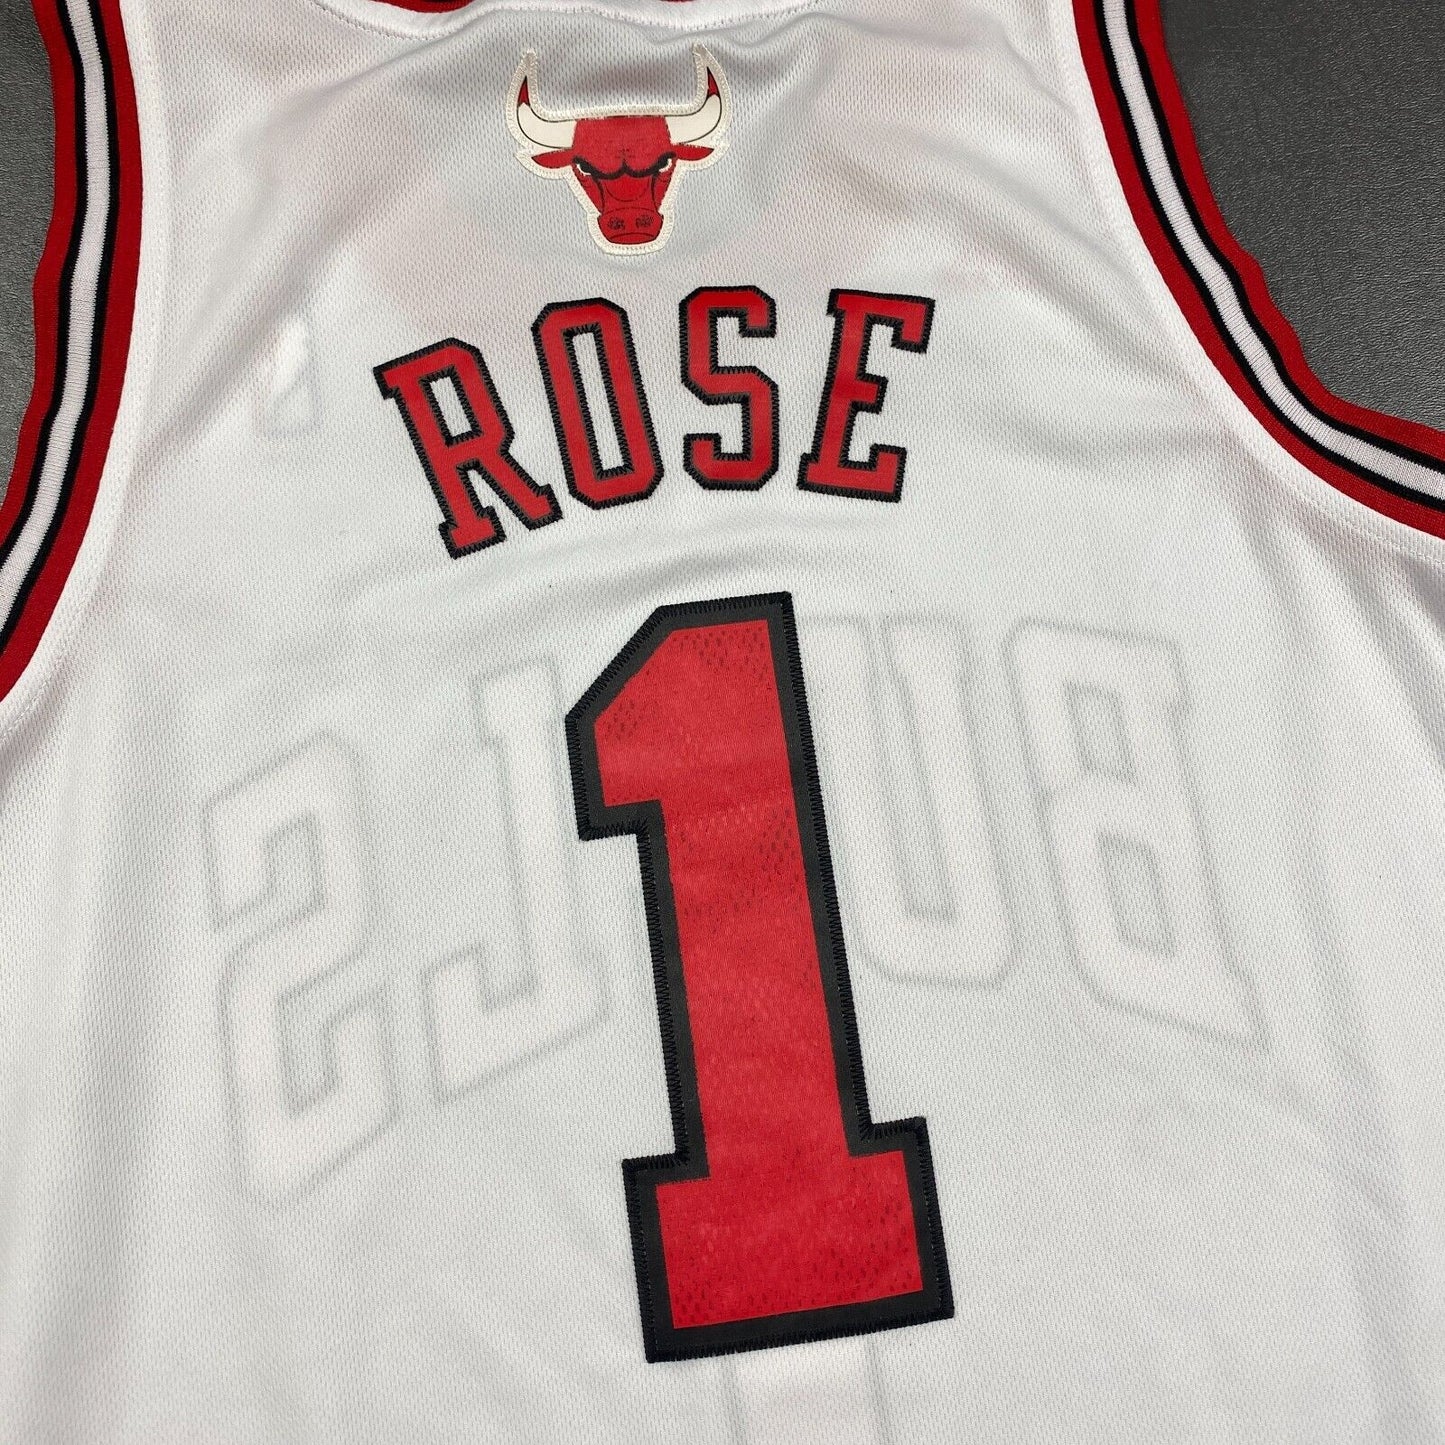 100% Authentic Derrick Rose Adidas Chicago Bulls Jersey Size Size S ( M ) Mens